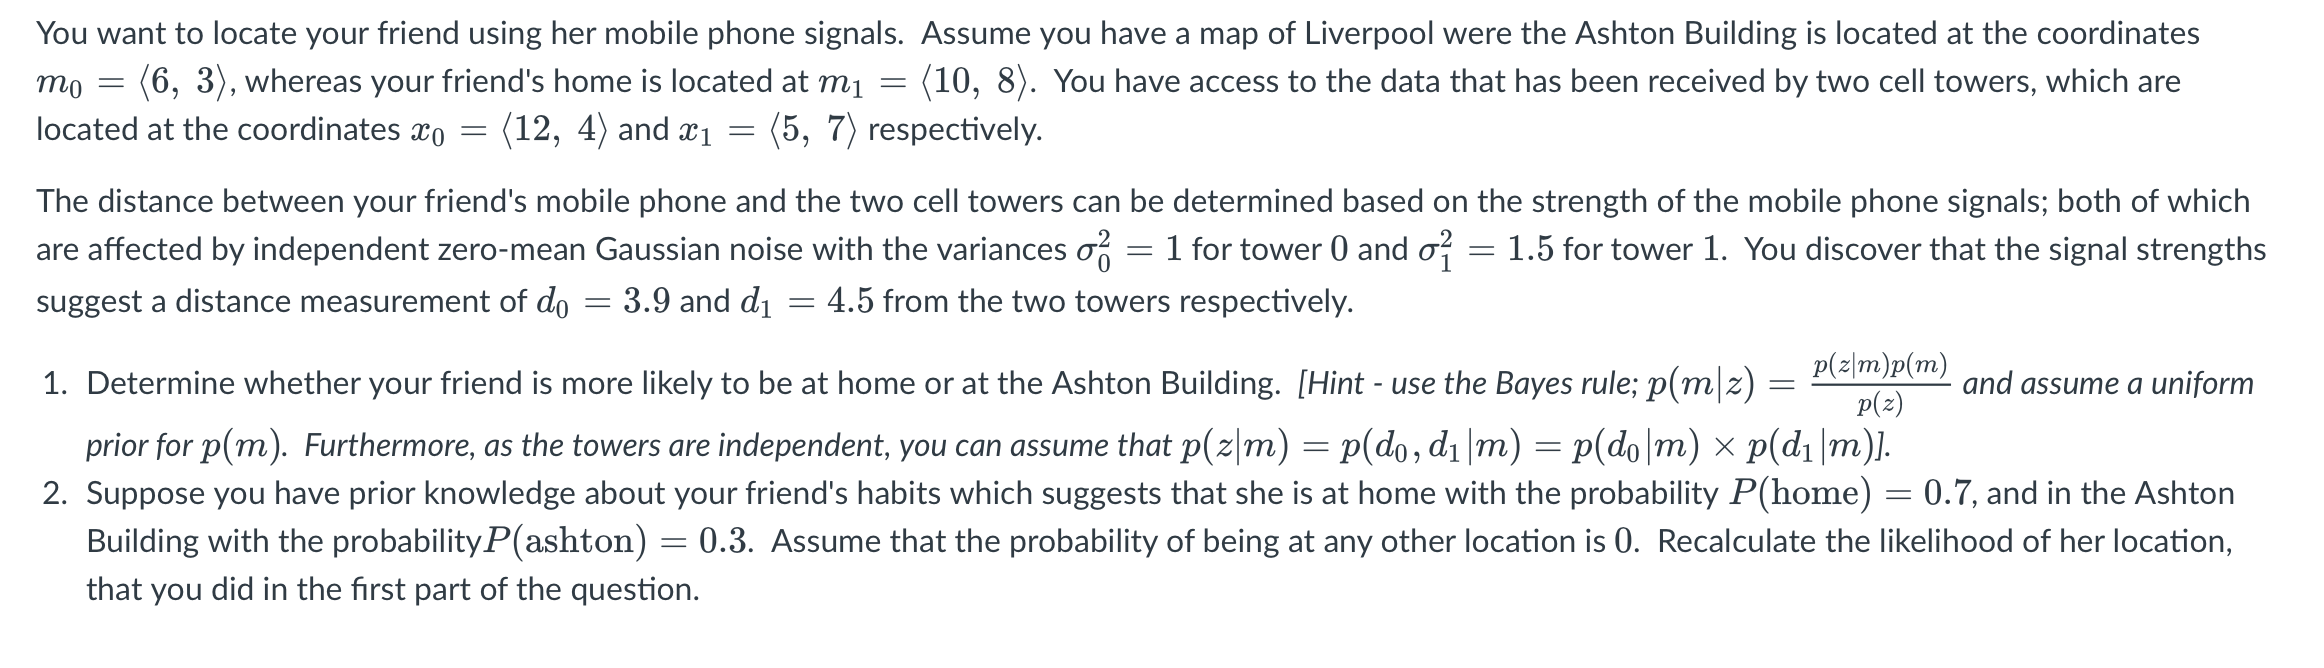 You want to locate your friend using her mobile phone signals. Assume you have a map of Liverpool were the